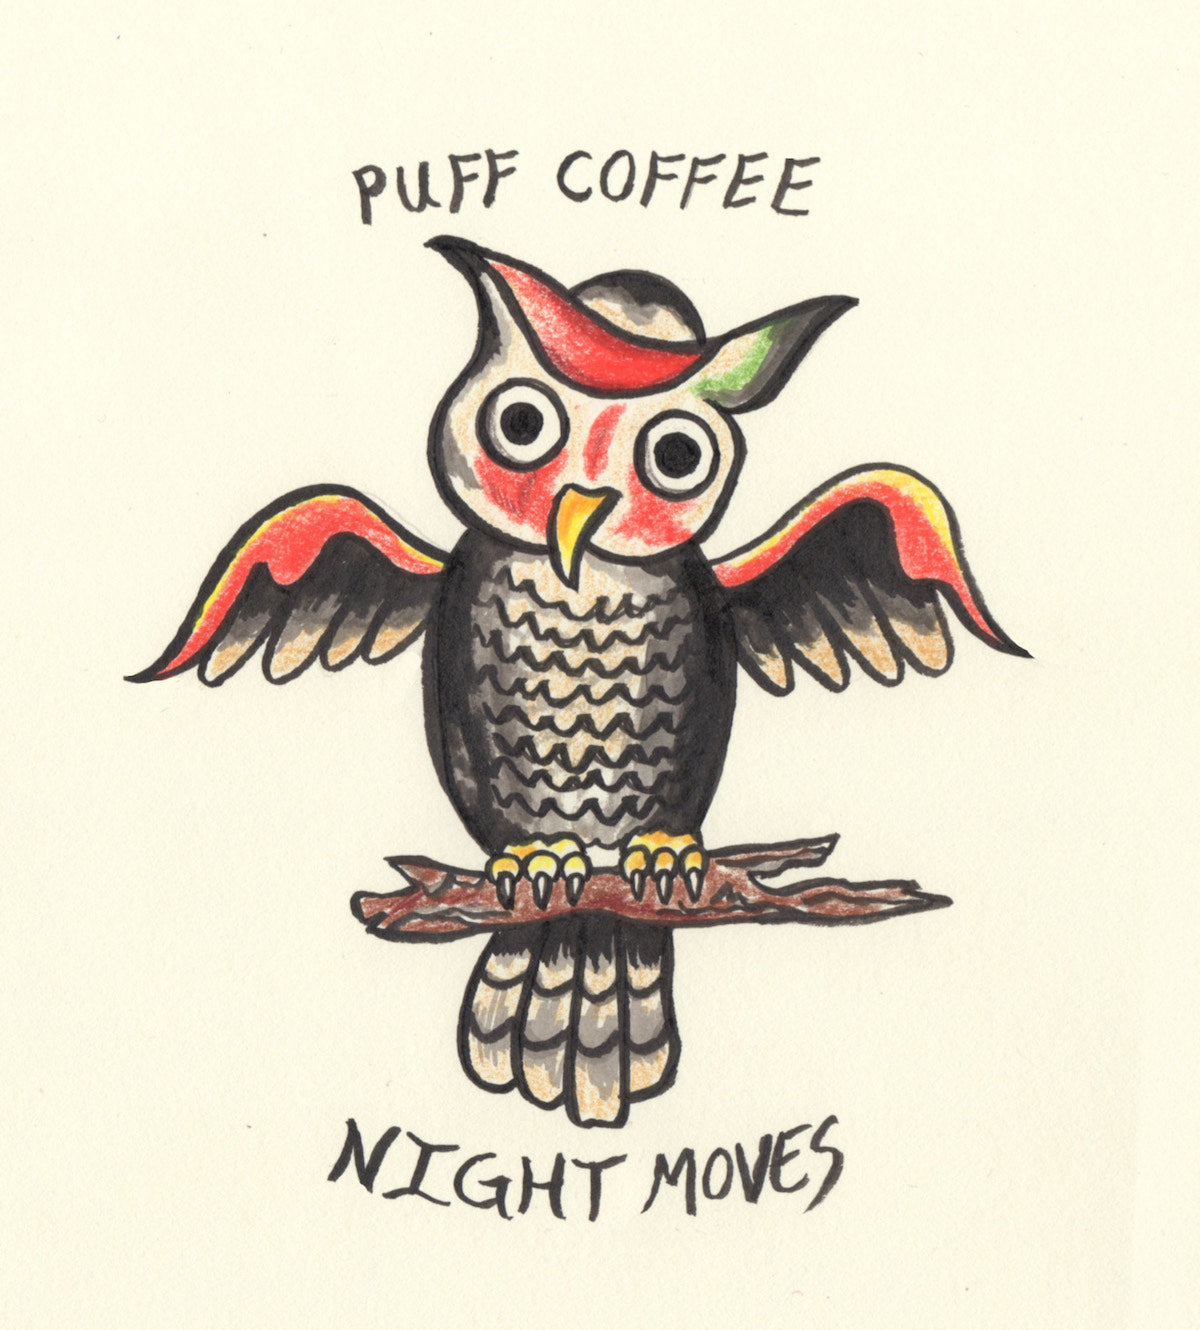 Night Moves Decaf